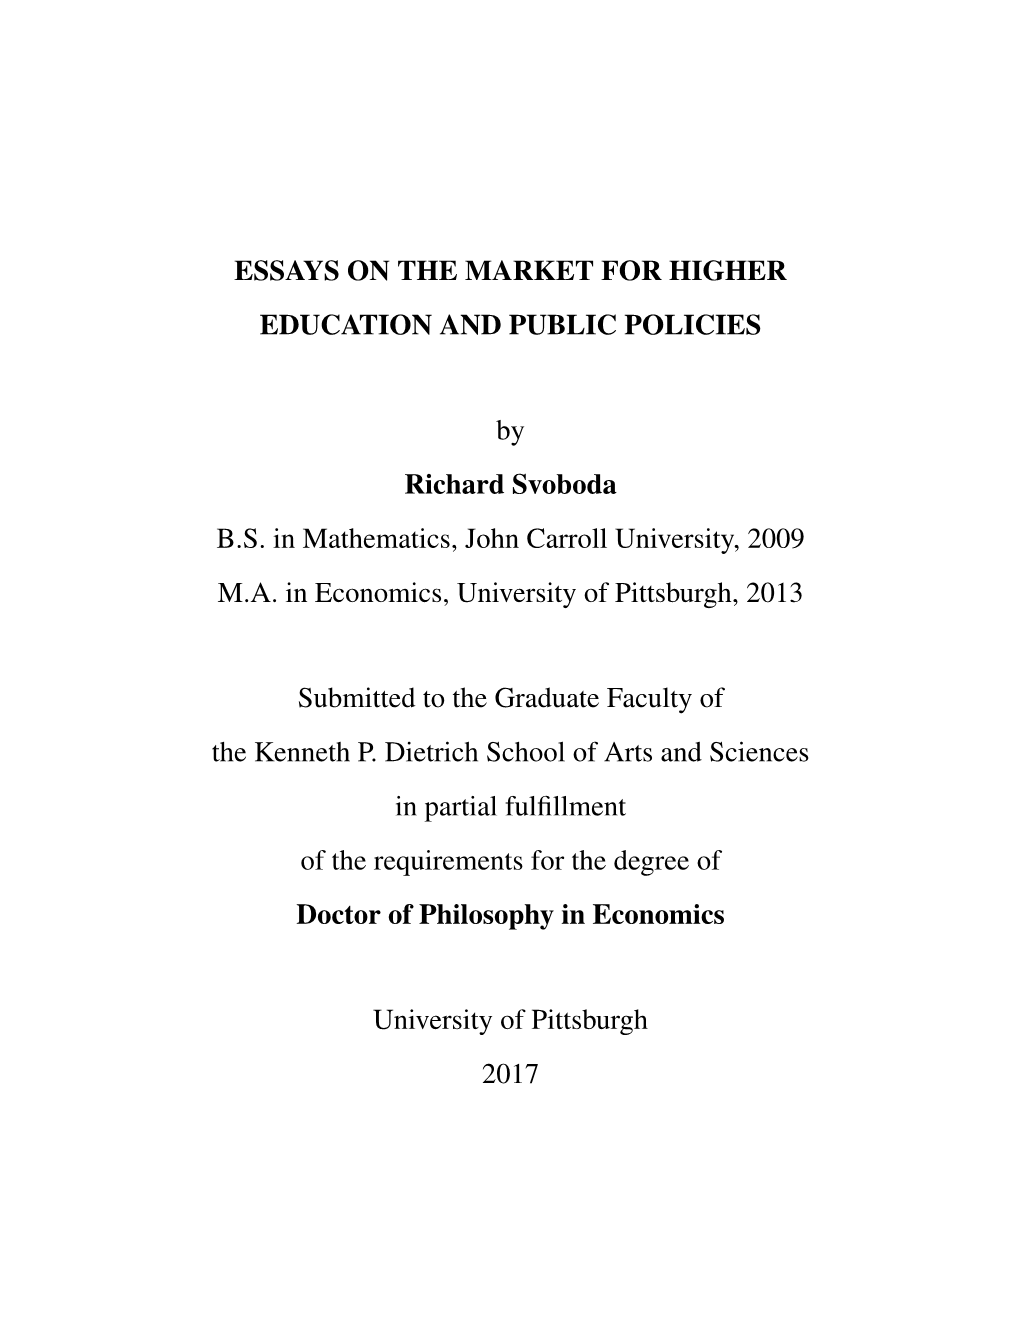 Higher Education and Public Policies